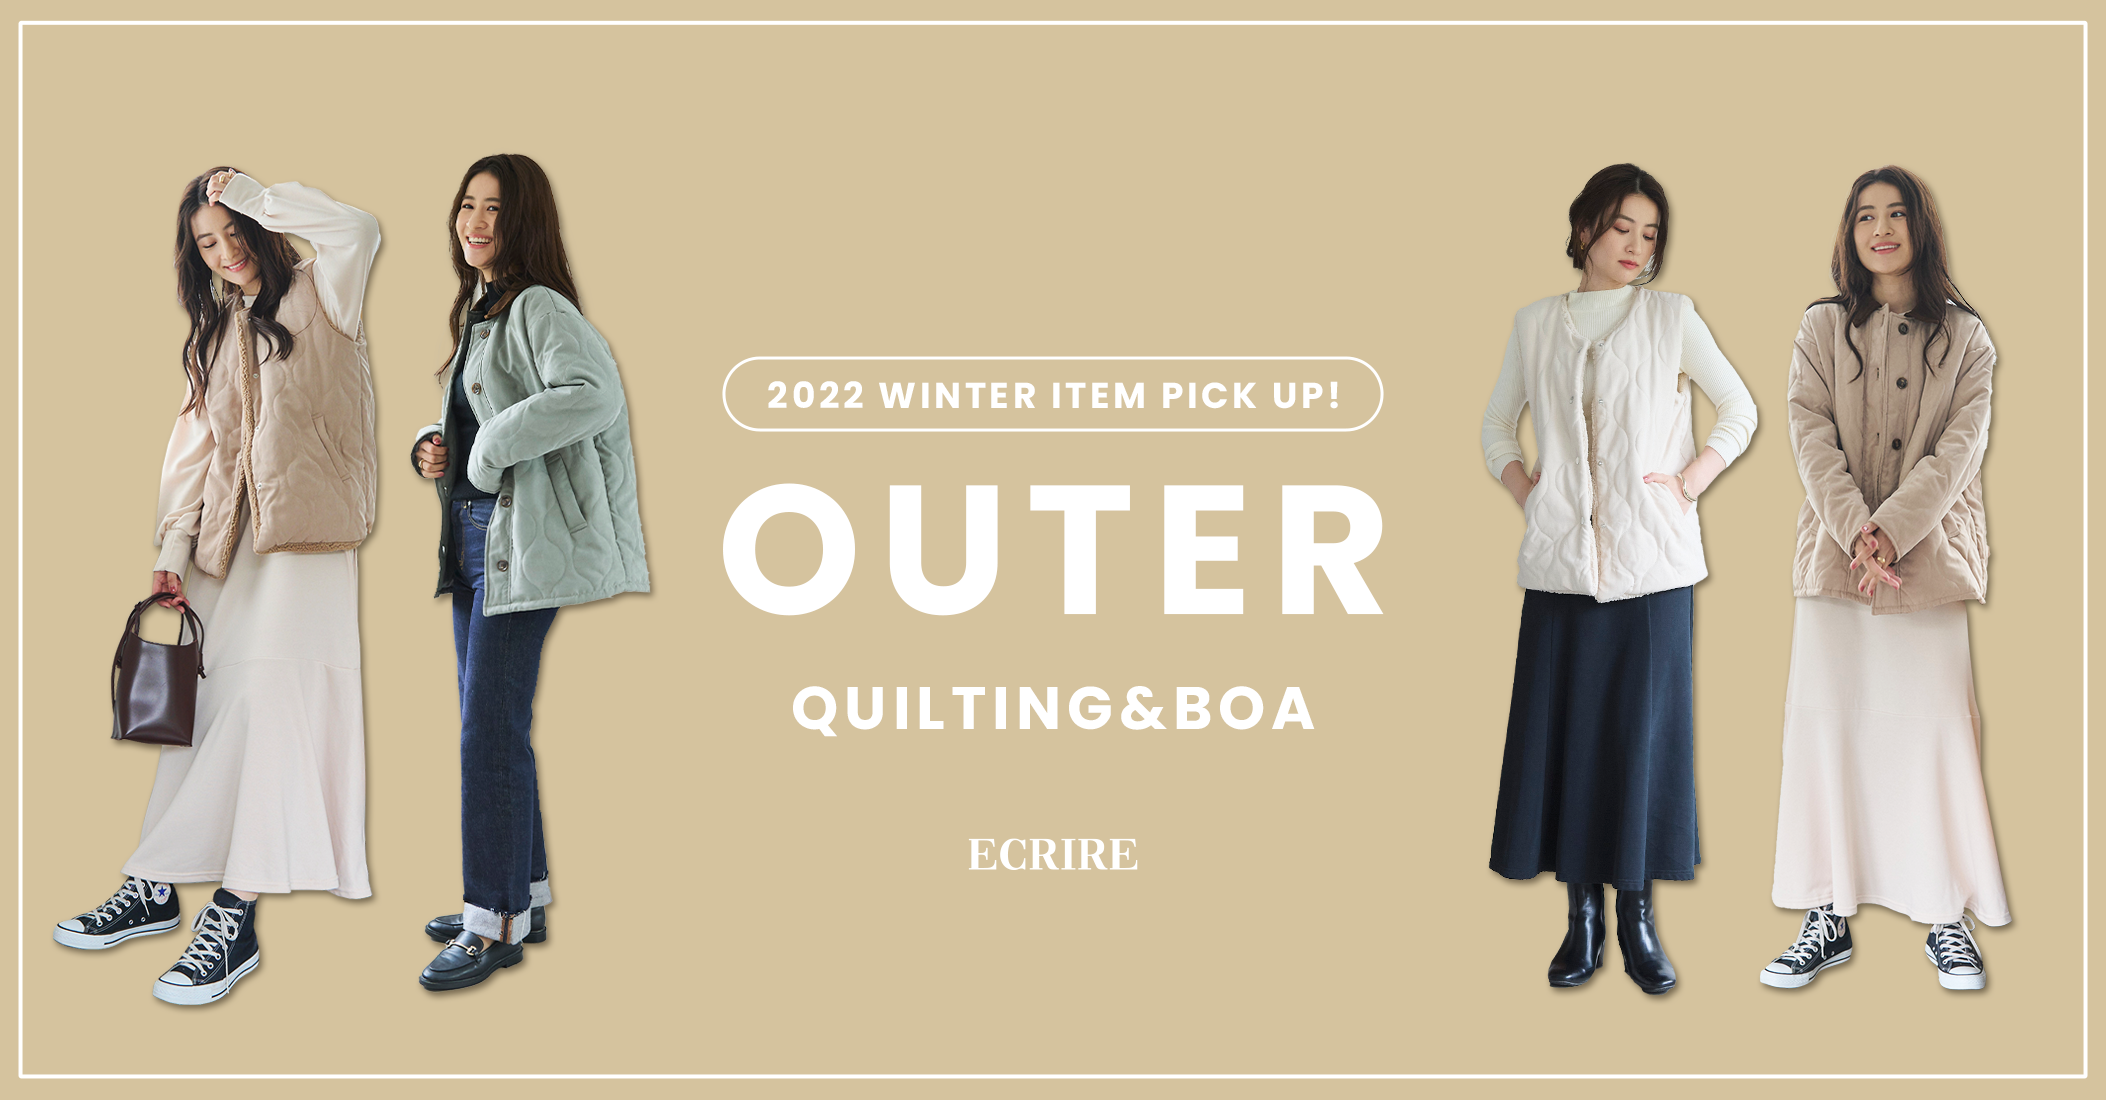 【PICK UP! OUTER】 QUILTING & BOA